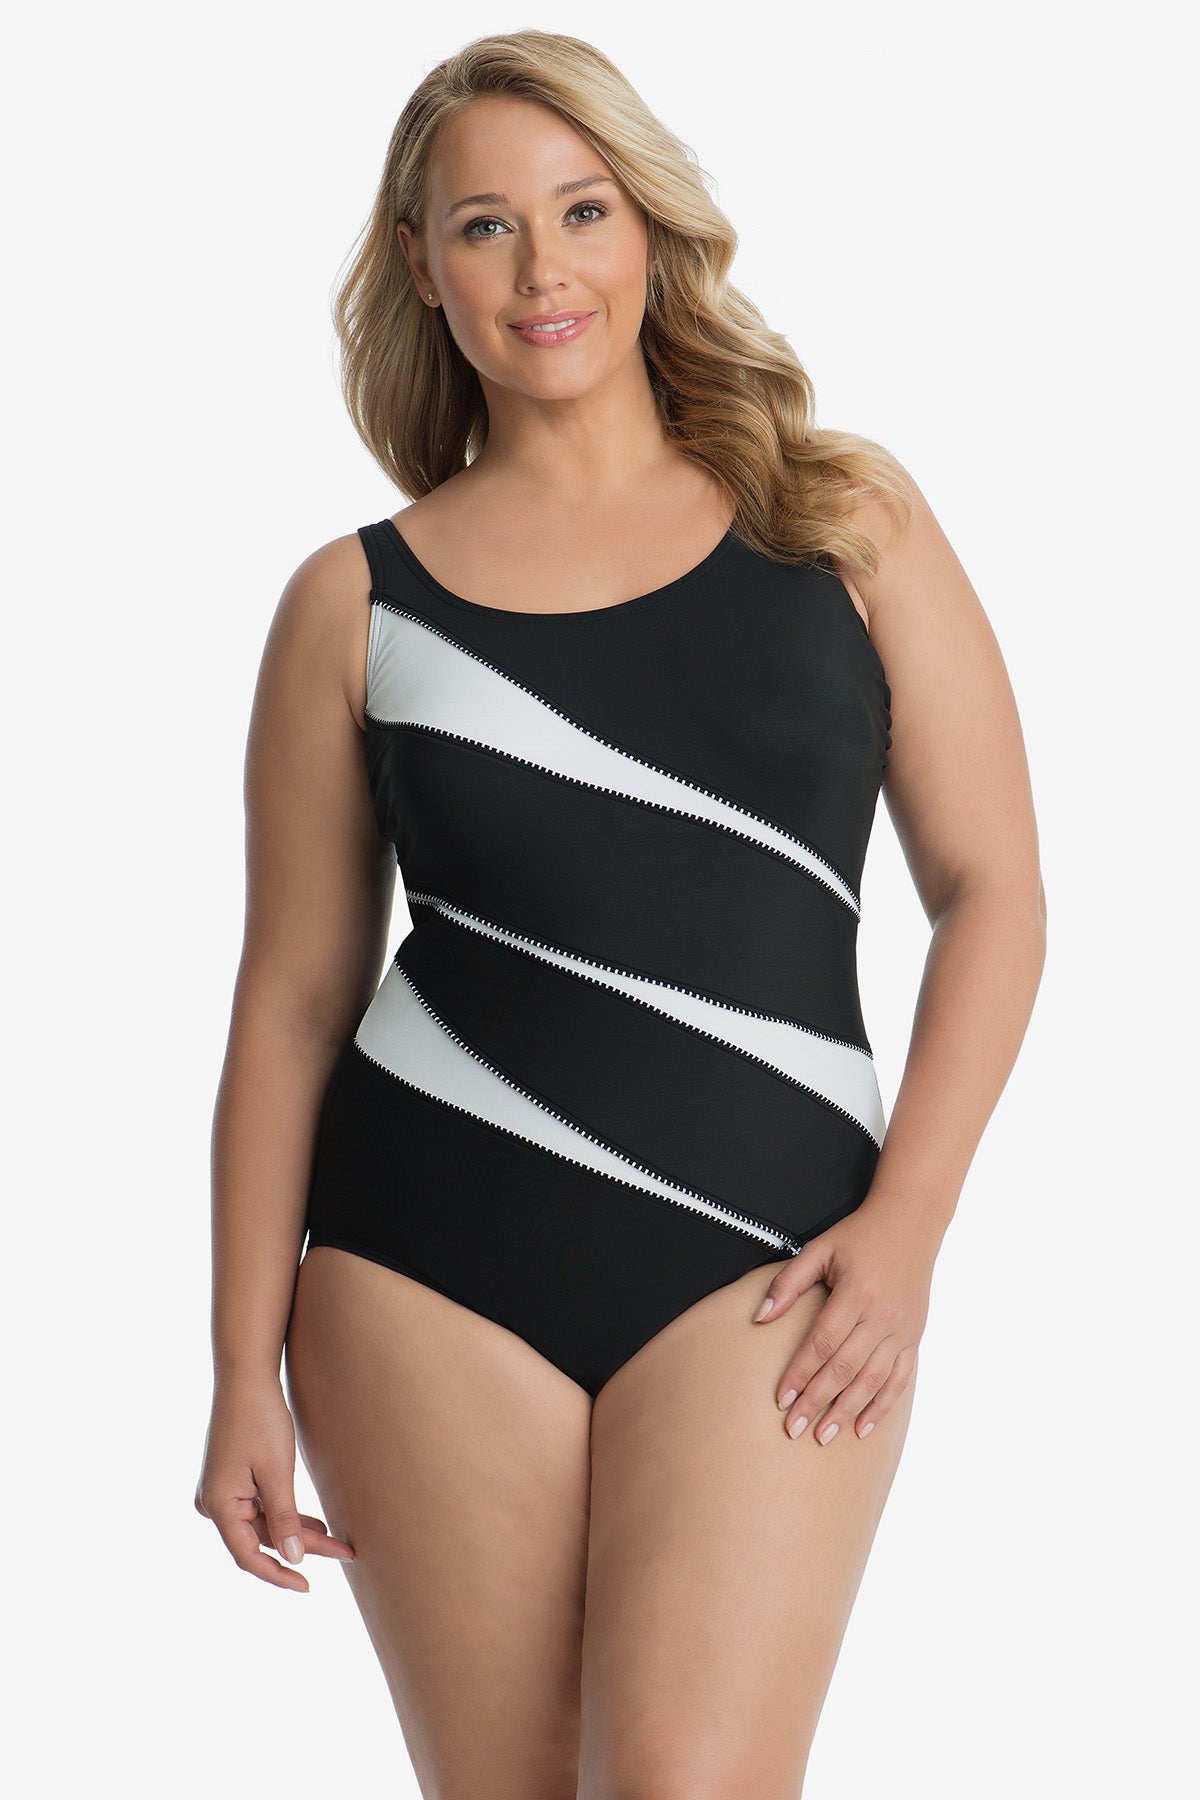 Miraclesuit Women's Swimwear DDD-Cup Helix Tummy Control Underwire Scoop  Neckline One Piece Swimsuit, Black/White, 10DDD at  Women's Clothing  store